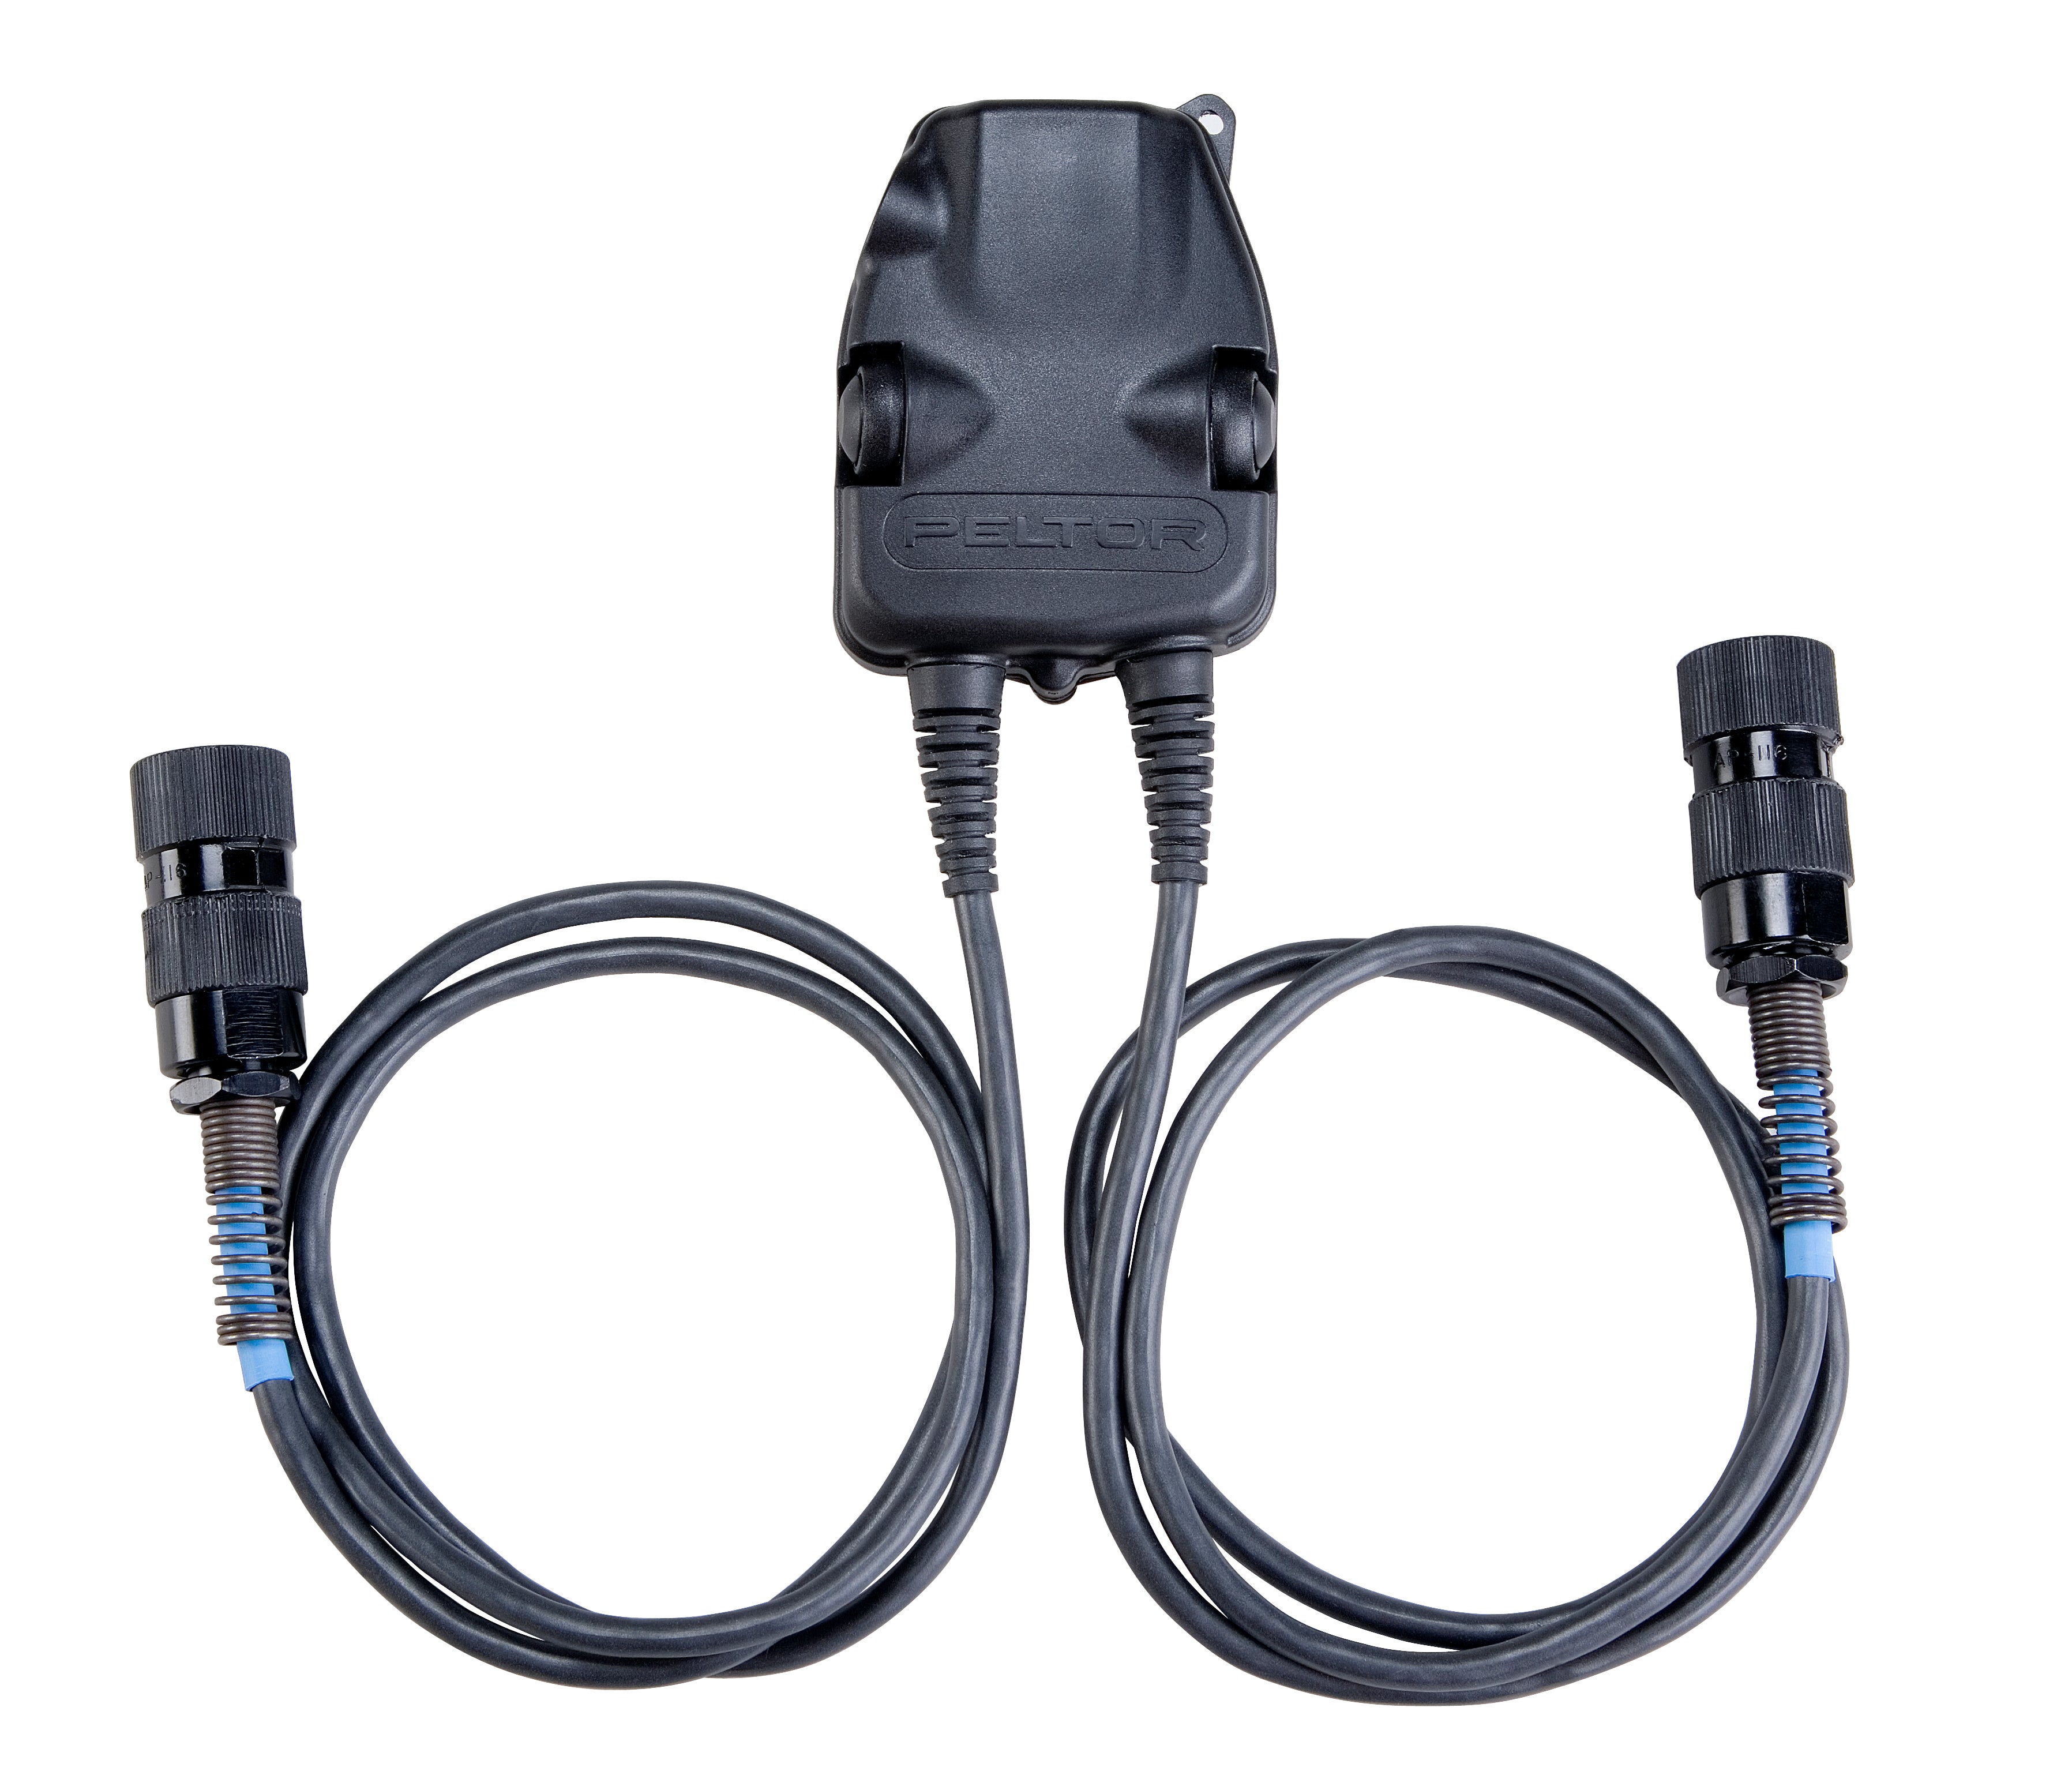 3M™ PELTOR™ DUAL Push-To-Talk (PTT) Adapter Military Radios FL5701, with 6-PIN MIL-C-55116 Connector, 1 EA/Case